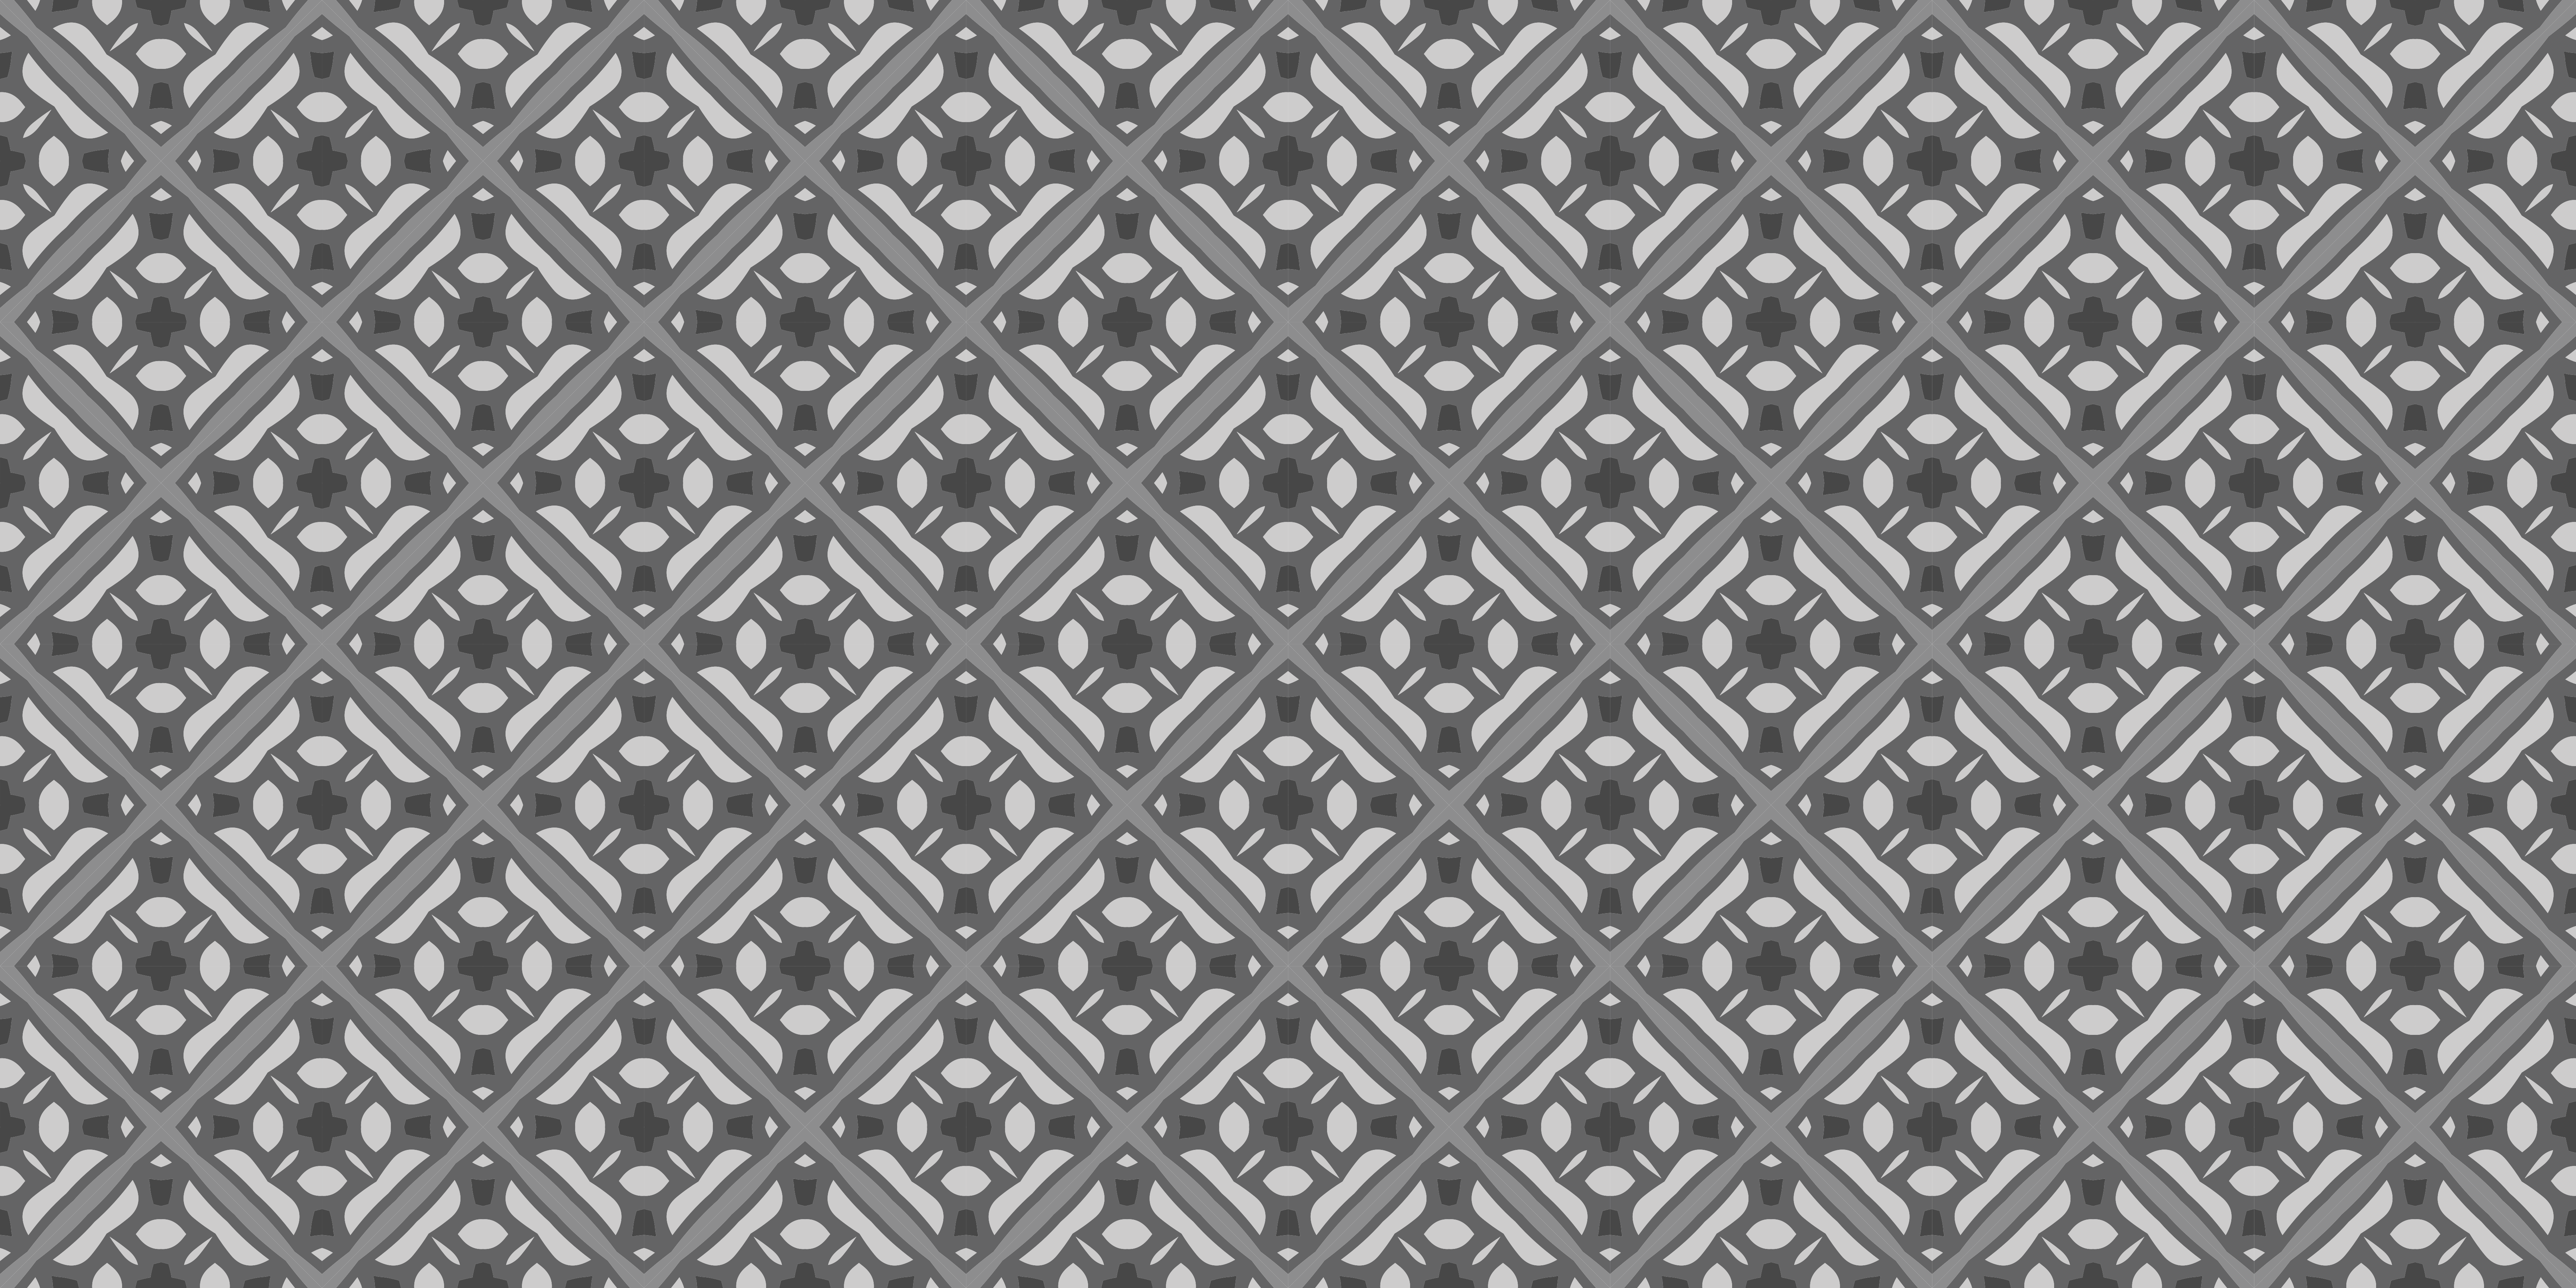 checkerboard black and white tile mat - TenStickers